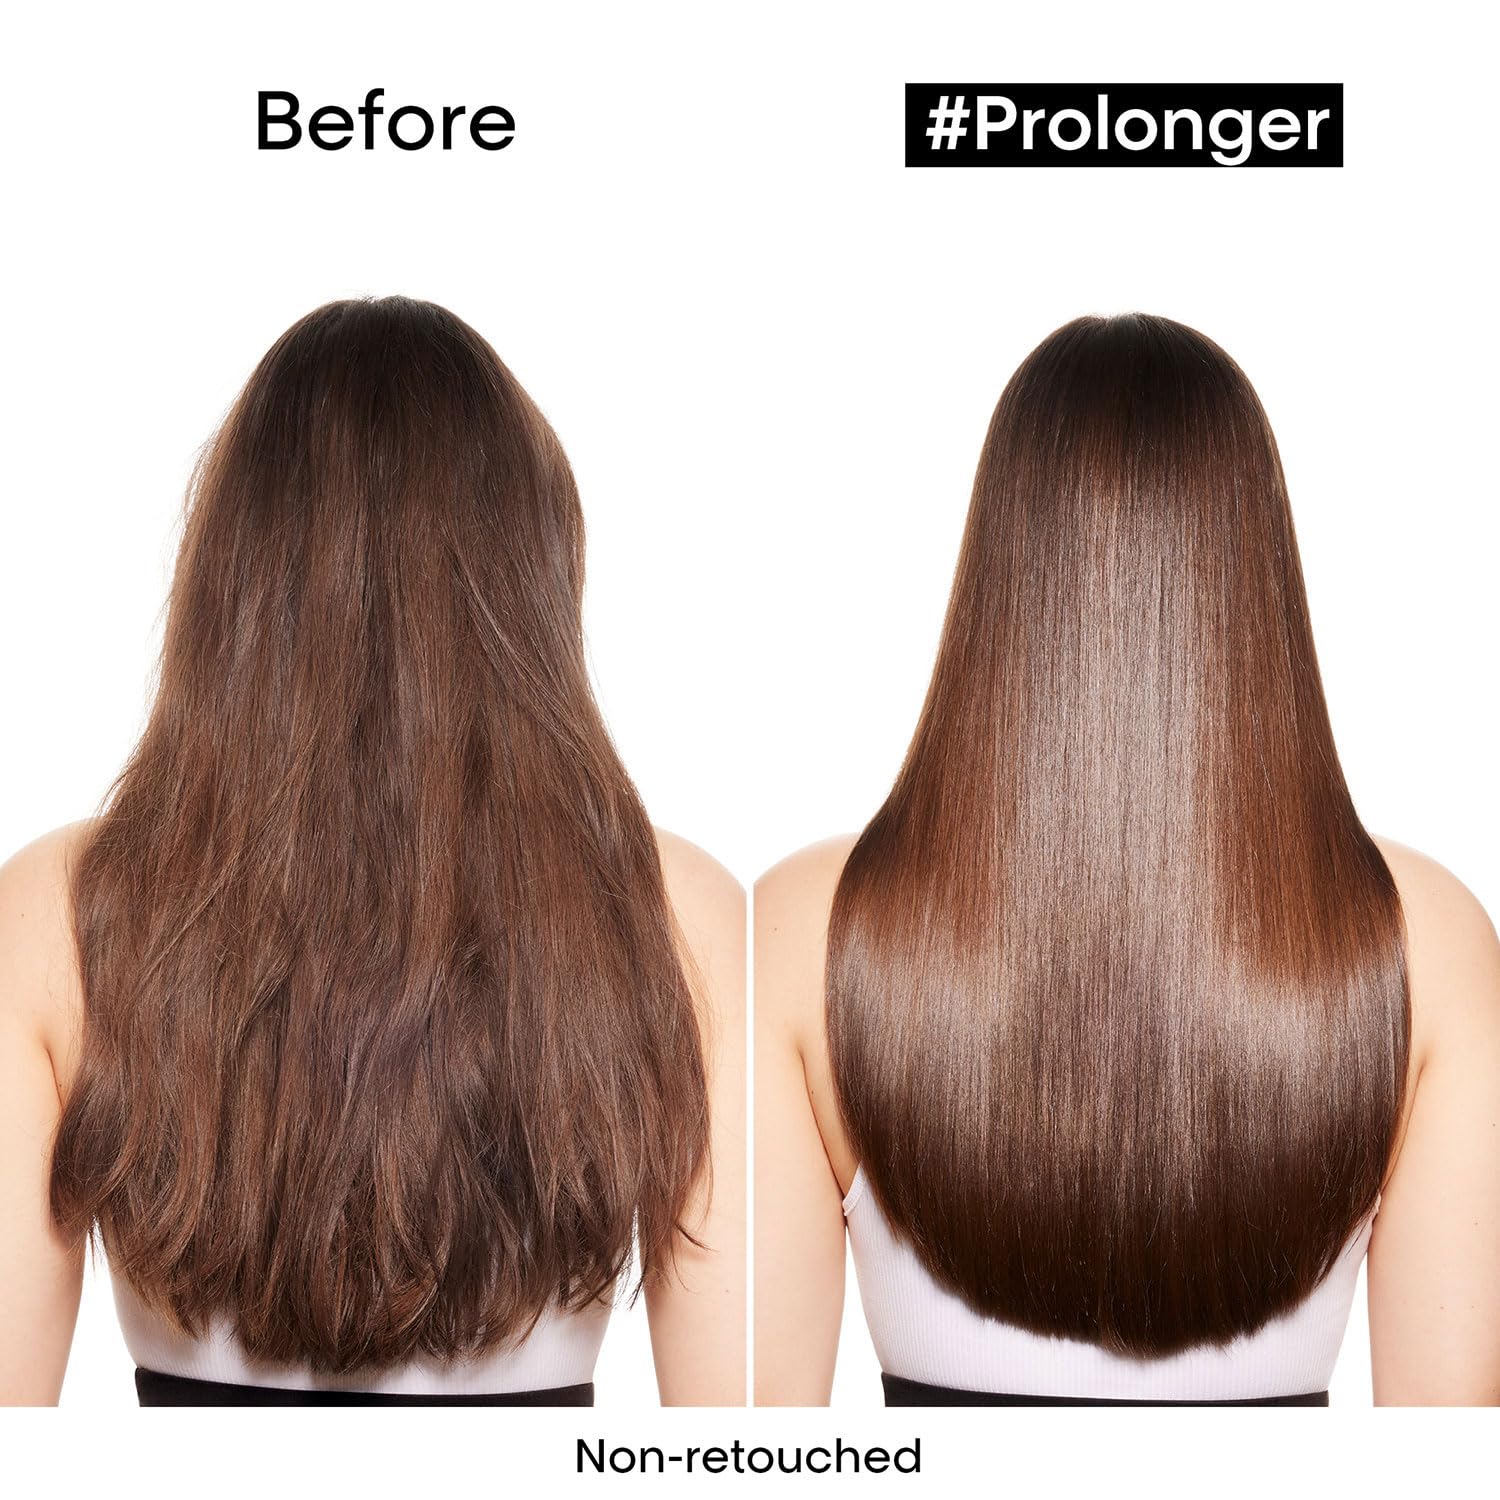 L'oreal Pro Longer Mask before & after